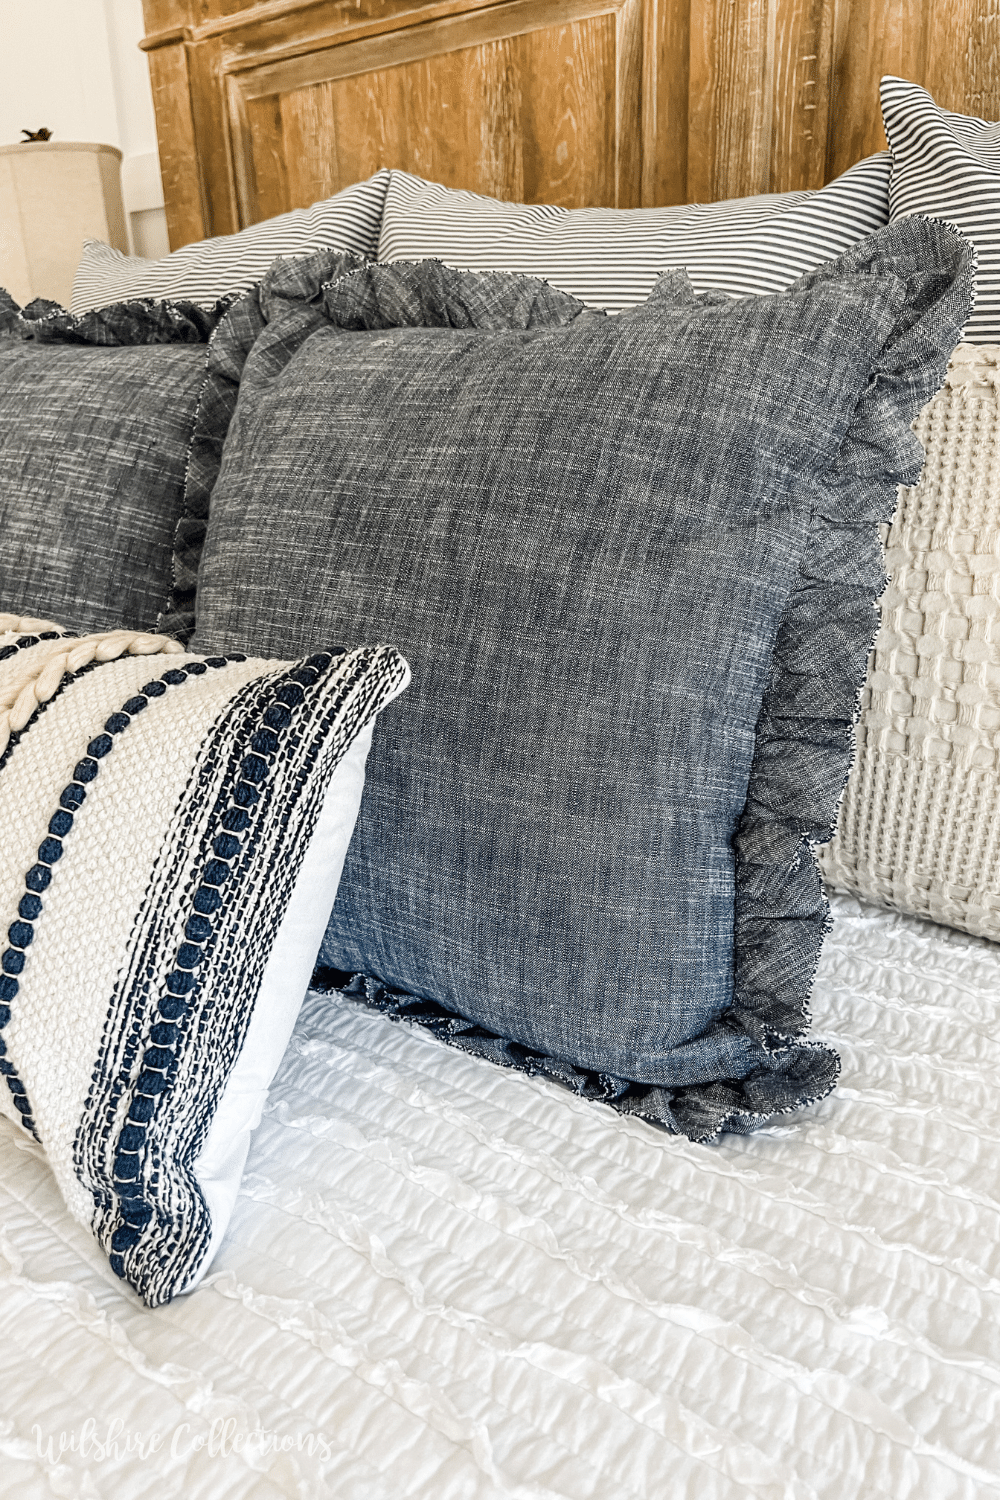 Neutral and navy bedding